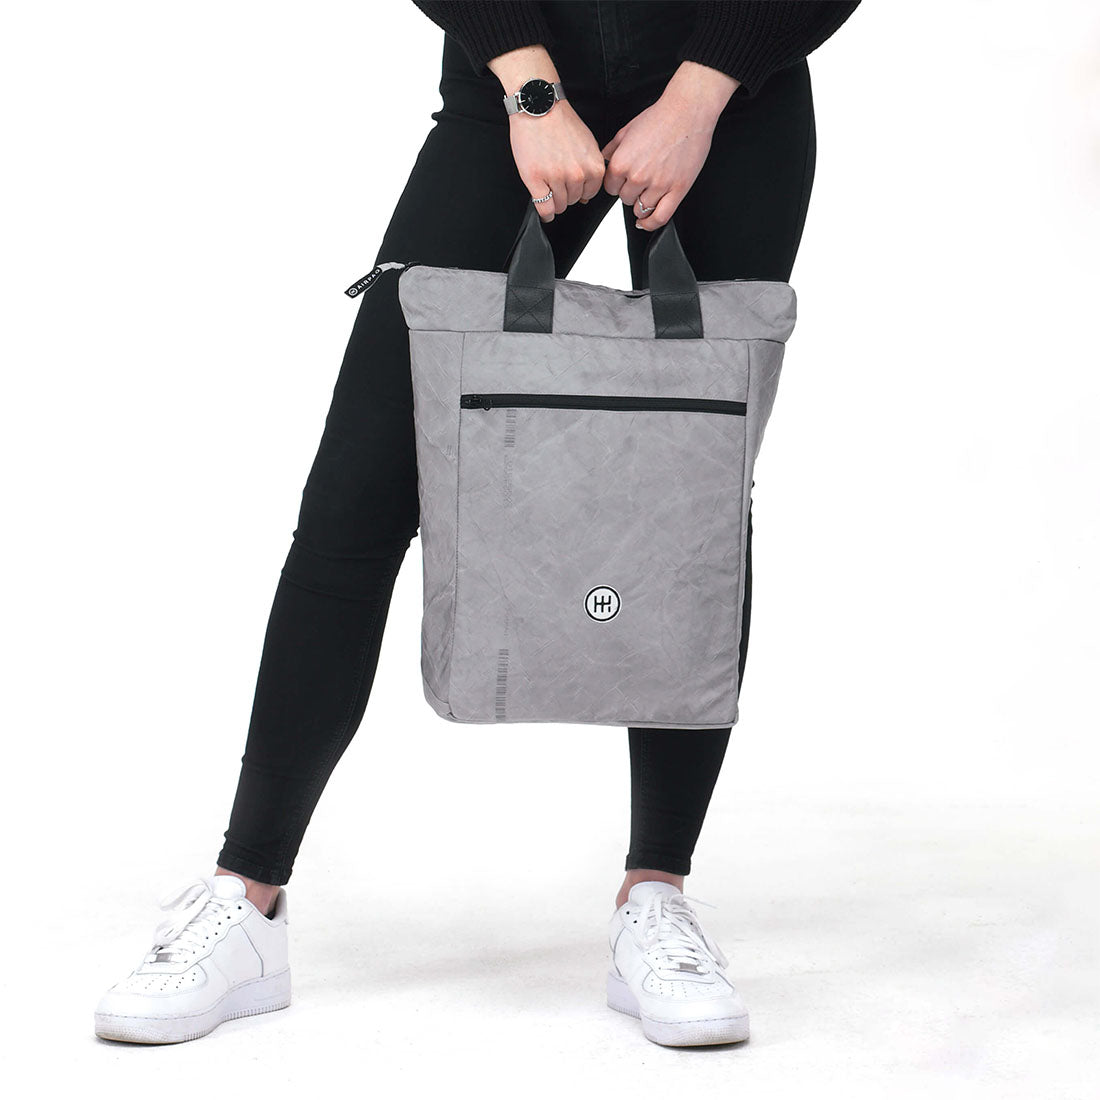 Totebag Grey / トートバッグ | エシカルコンビニ / ETHICAL CONVENI